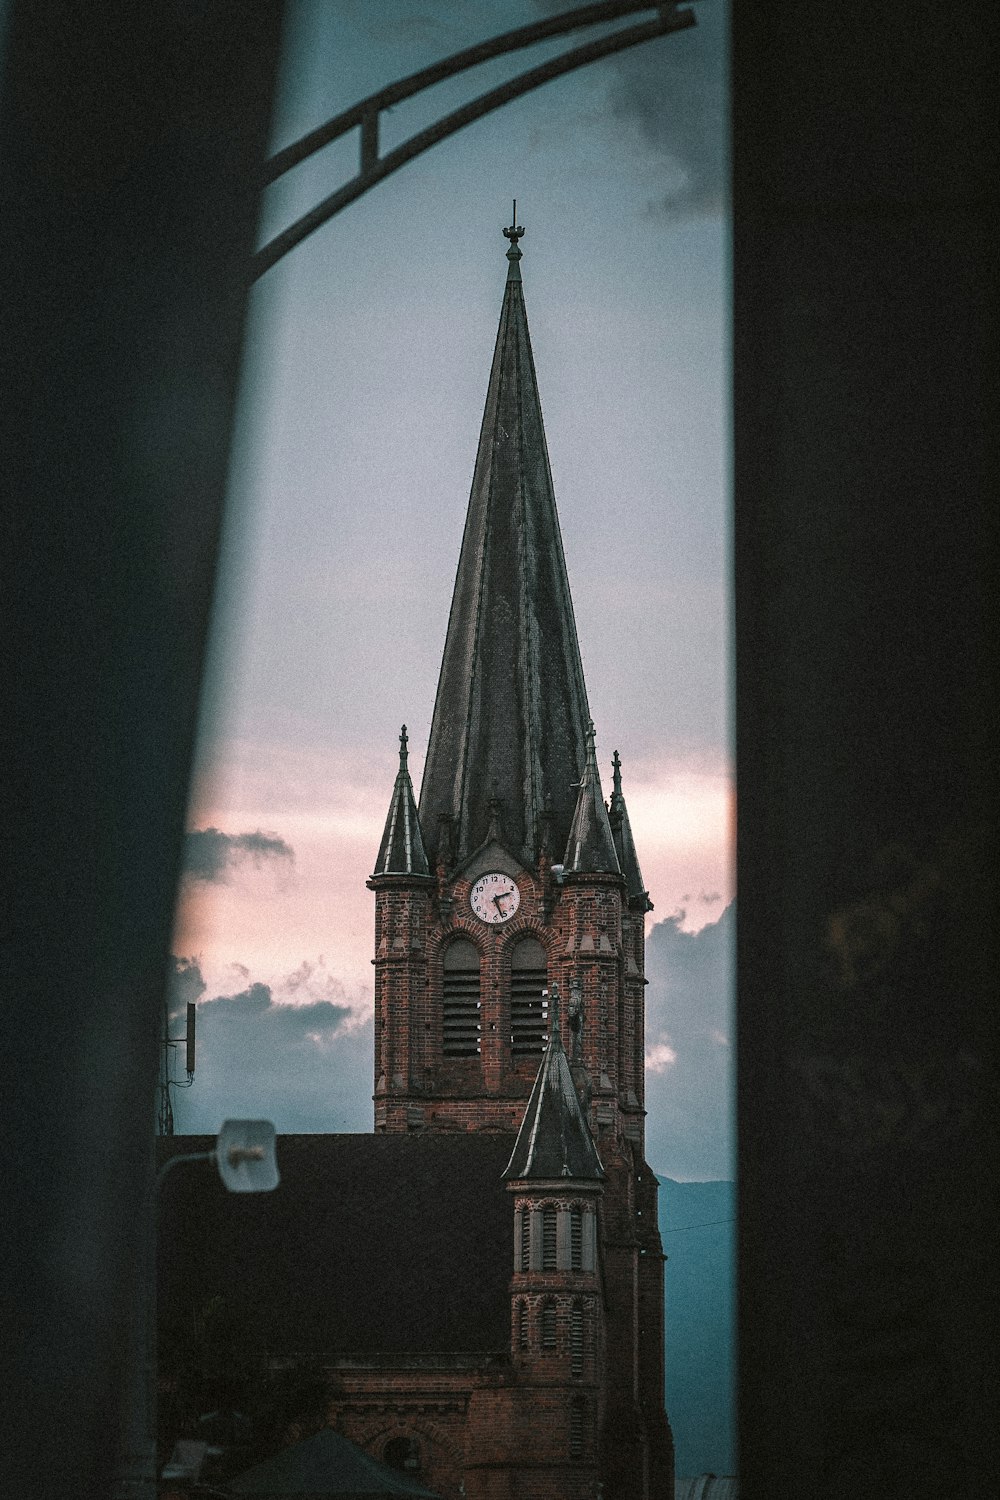 a view of a clock tower from a window